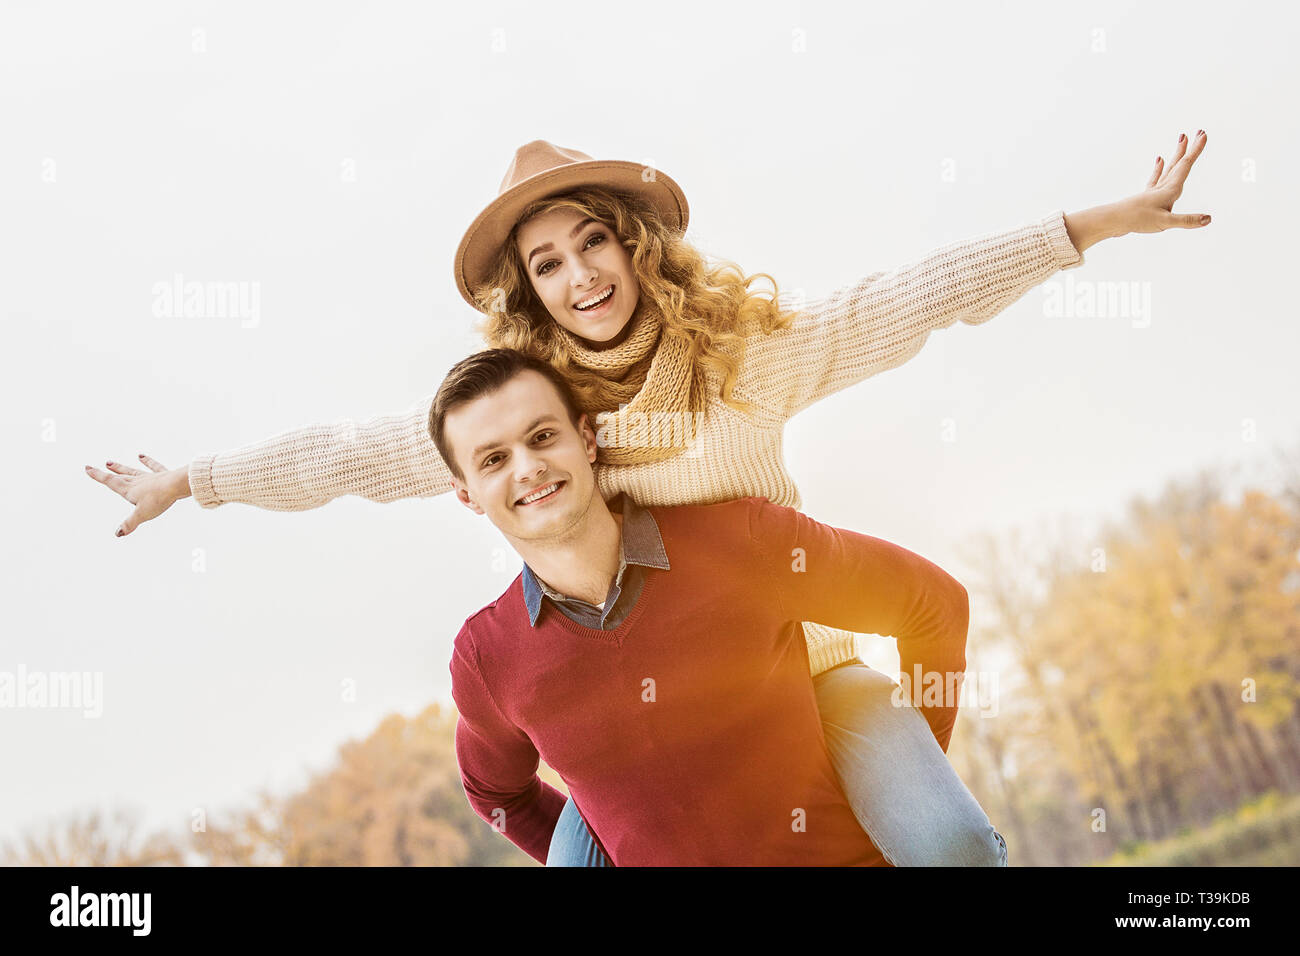 Enjoy every moment together. Low-angle view of cheerful woman keeping arms outstretched while piggybacking her boyfriend. Young man carrying beautiful Stock Photo